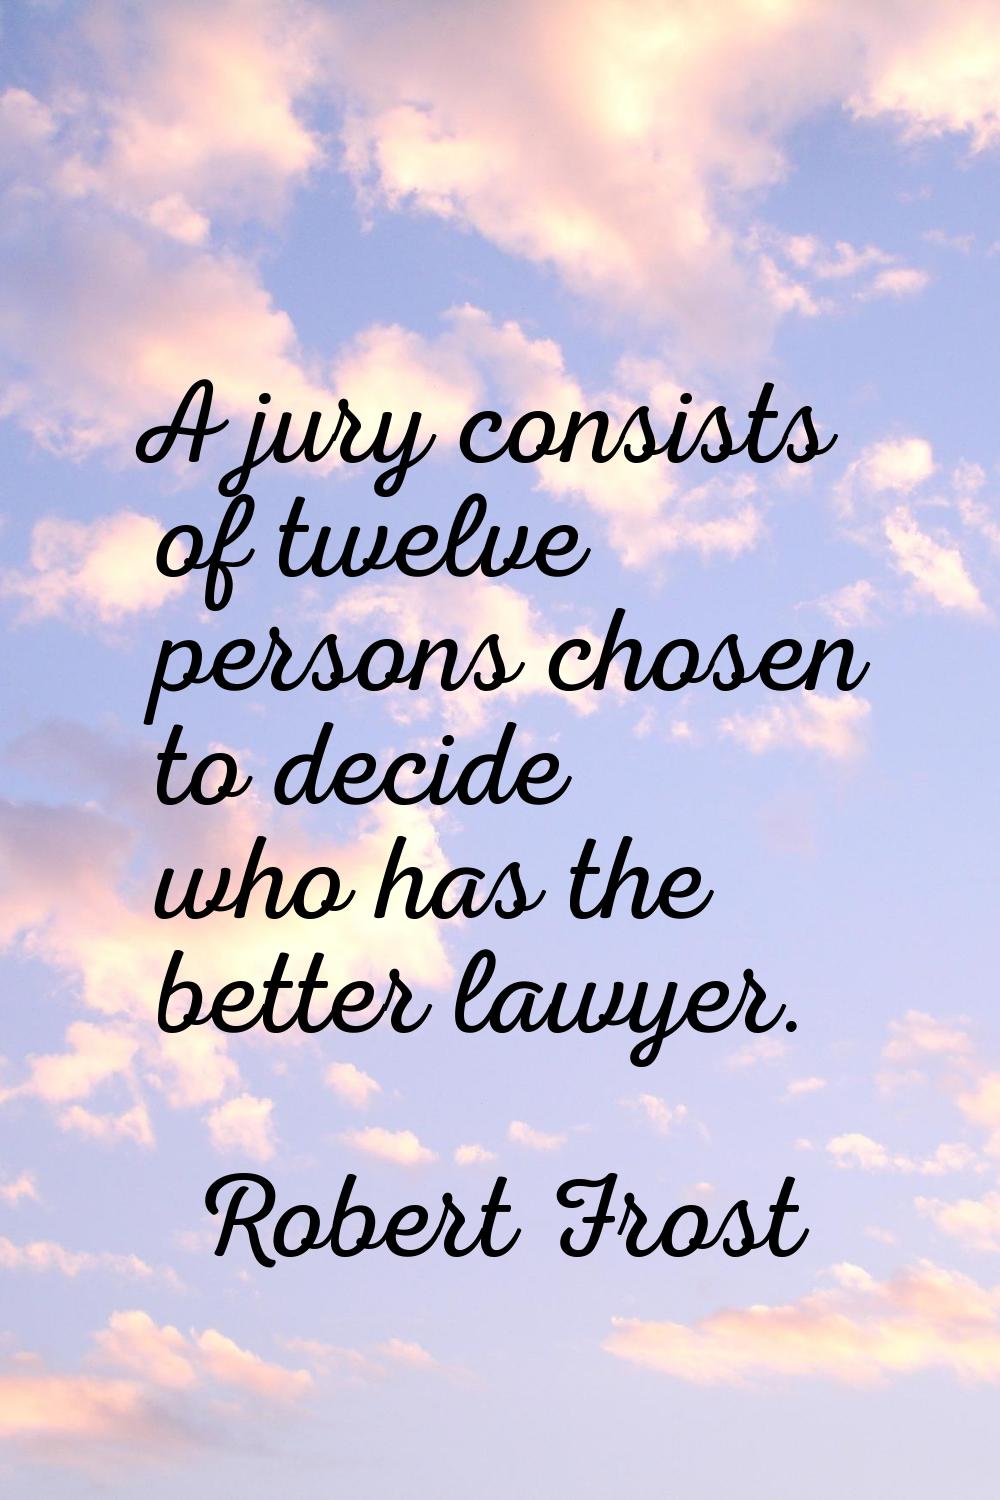 A jury consists of twelve persons chosen to decide who has the better lawyer.